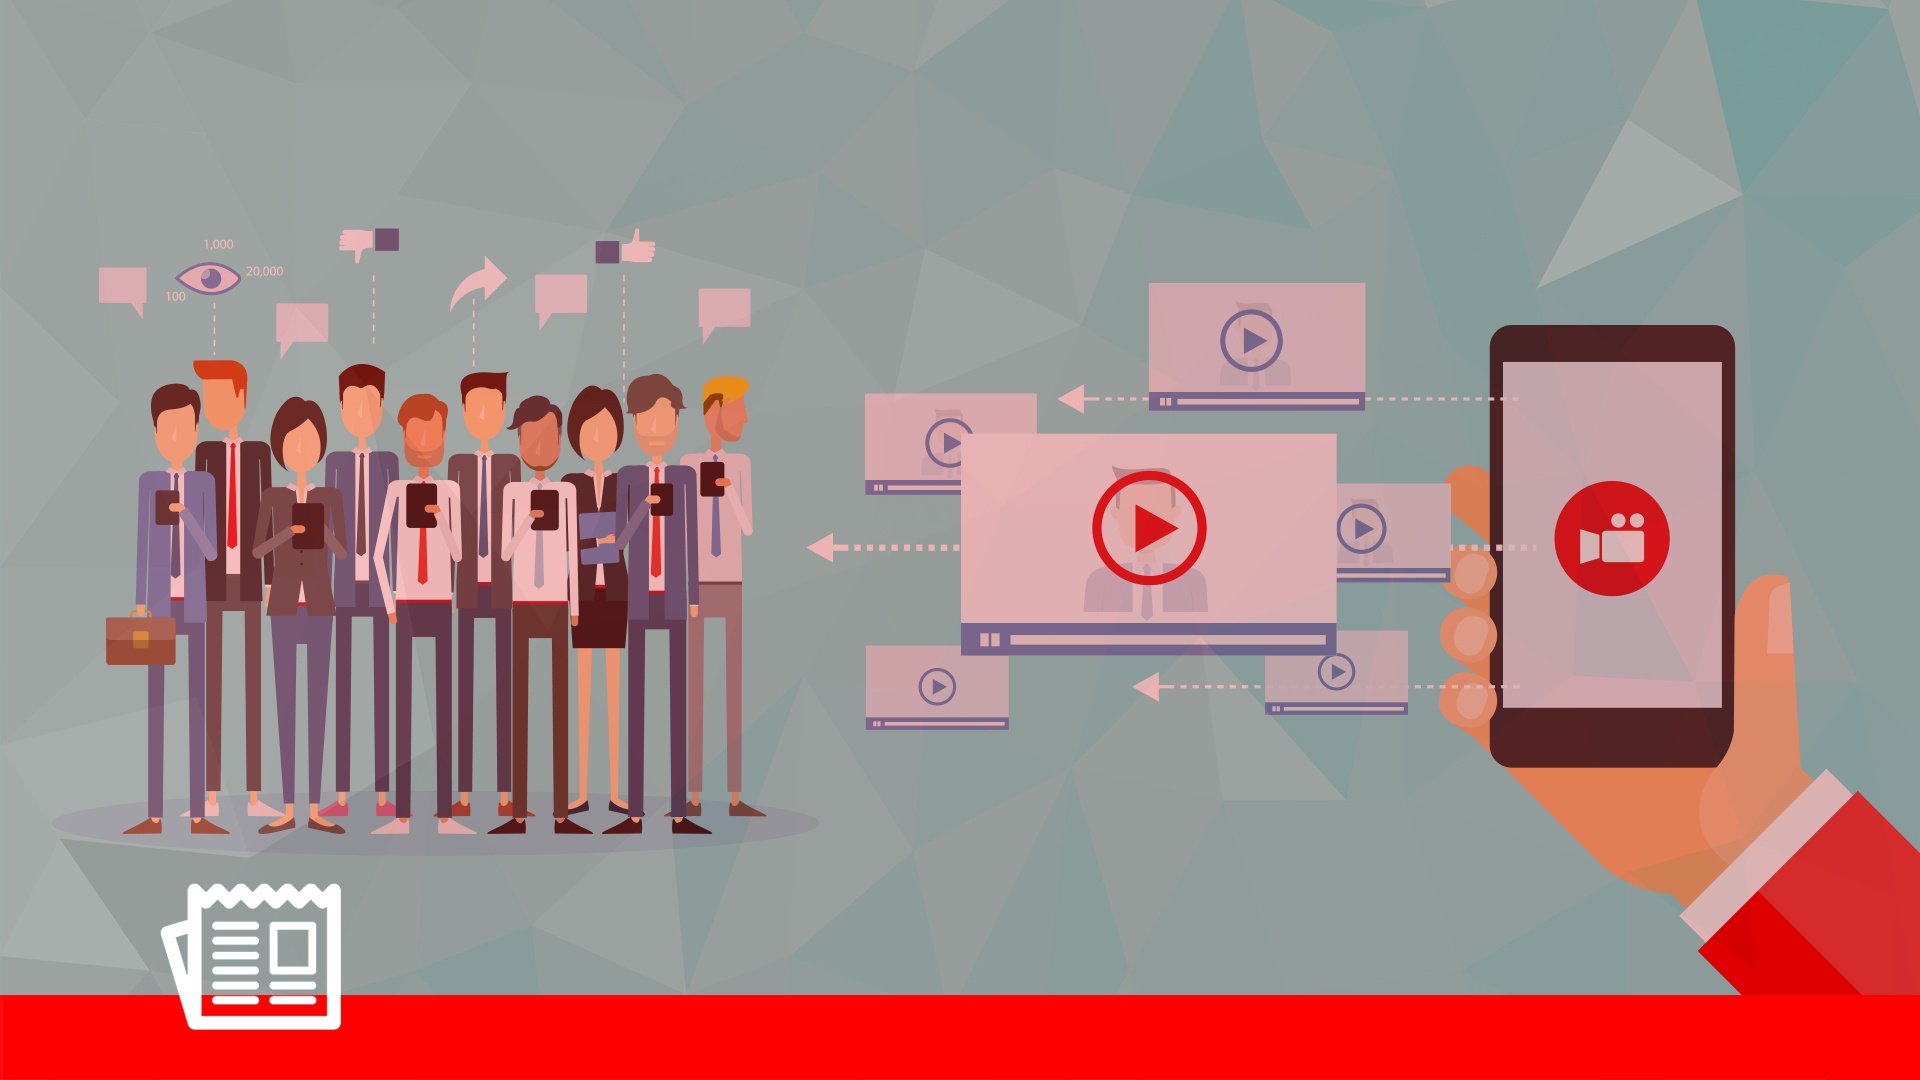 There is a Growing Demand for Video Content – How Can Marketers Capitalize